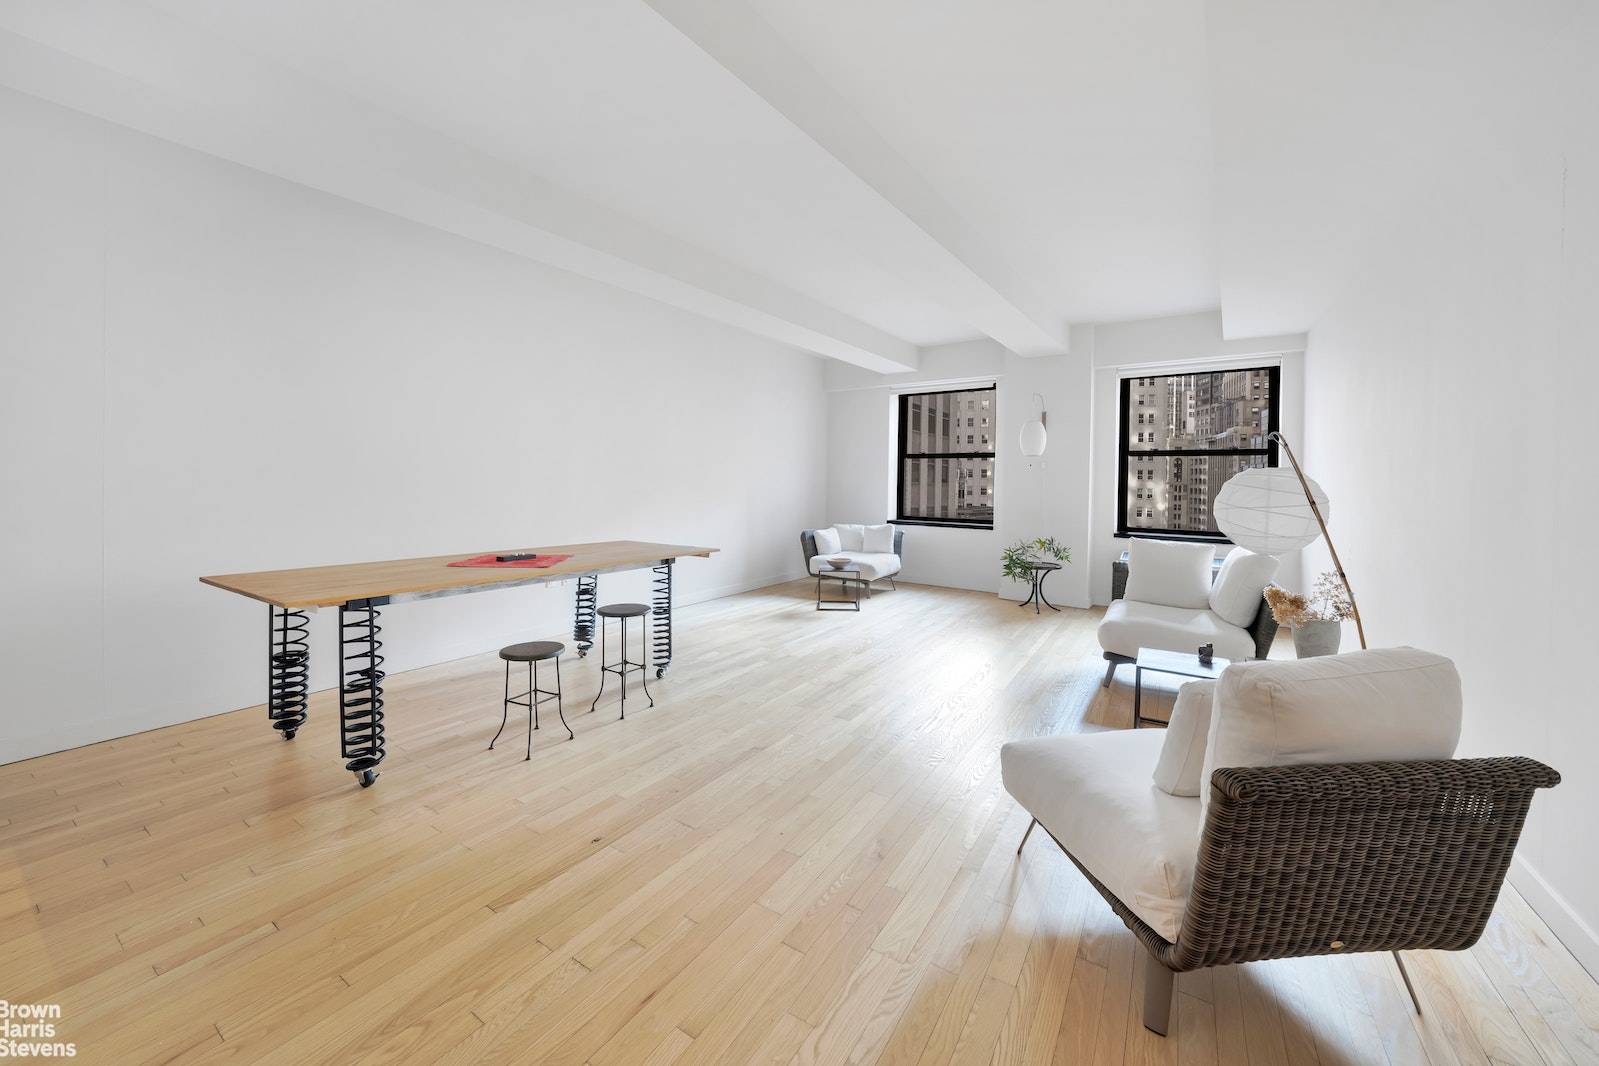 Welcome to Apartment 1506 at the exquisite 20 Pine Street, a quintessential slice of New York real estate nestled within the vibrant heart of the Financial District.